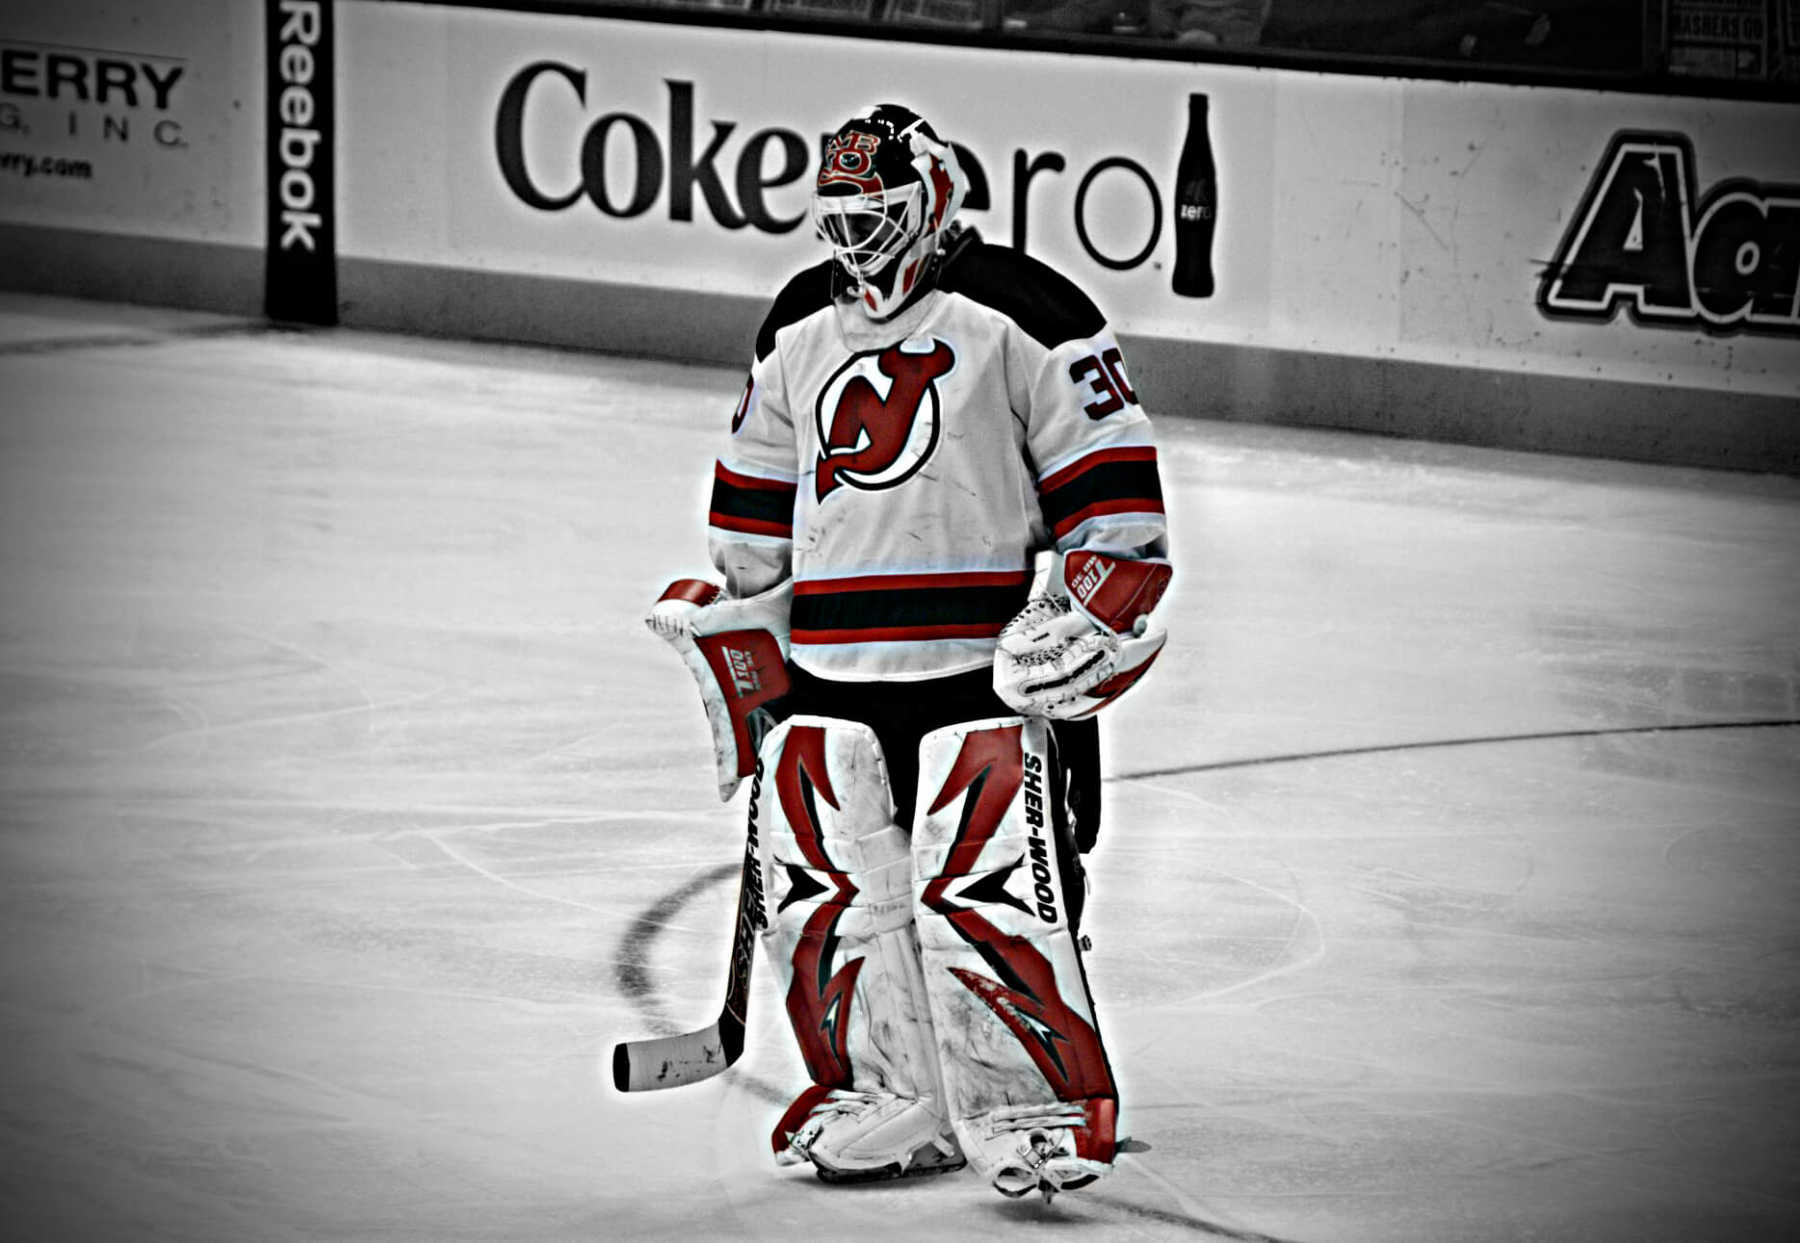 Martin Brodeur credited with goal in first game back